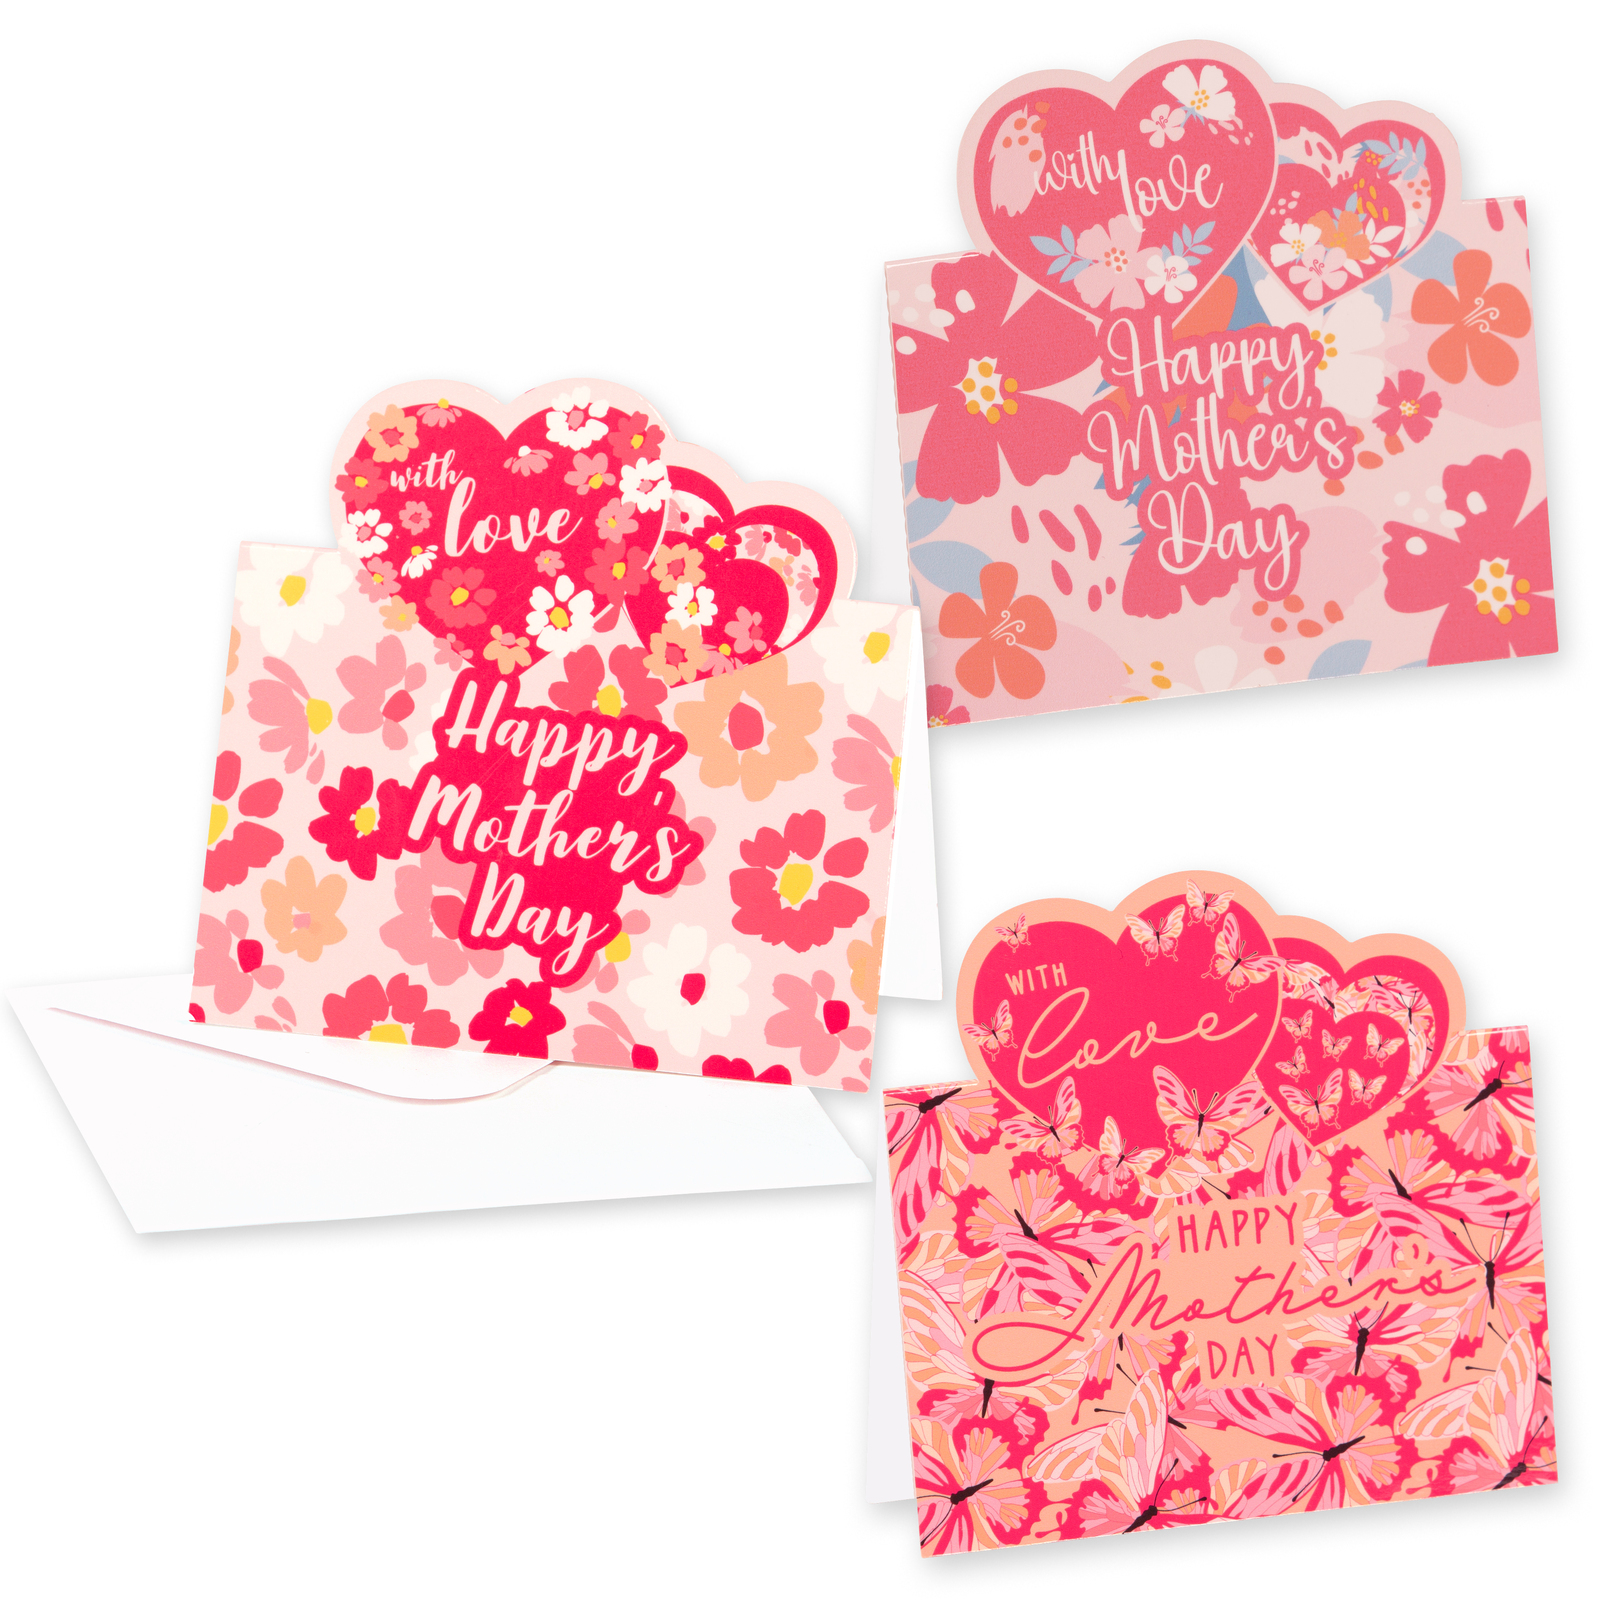 Gift Card With Envelope - Pack of 12 ($0.60 ea)